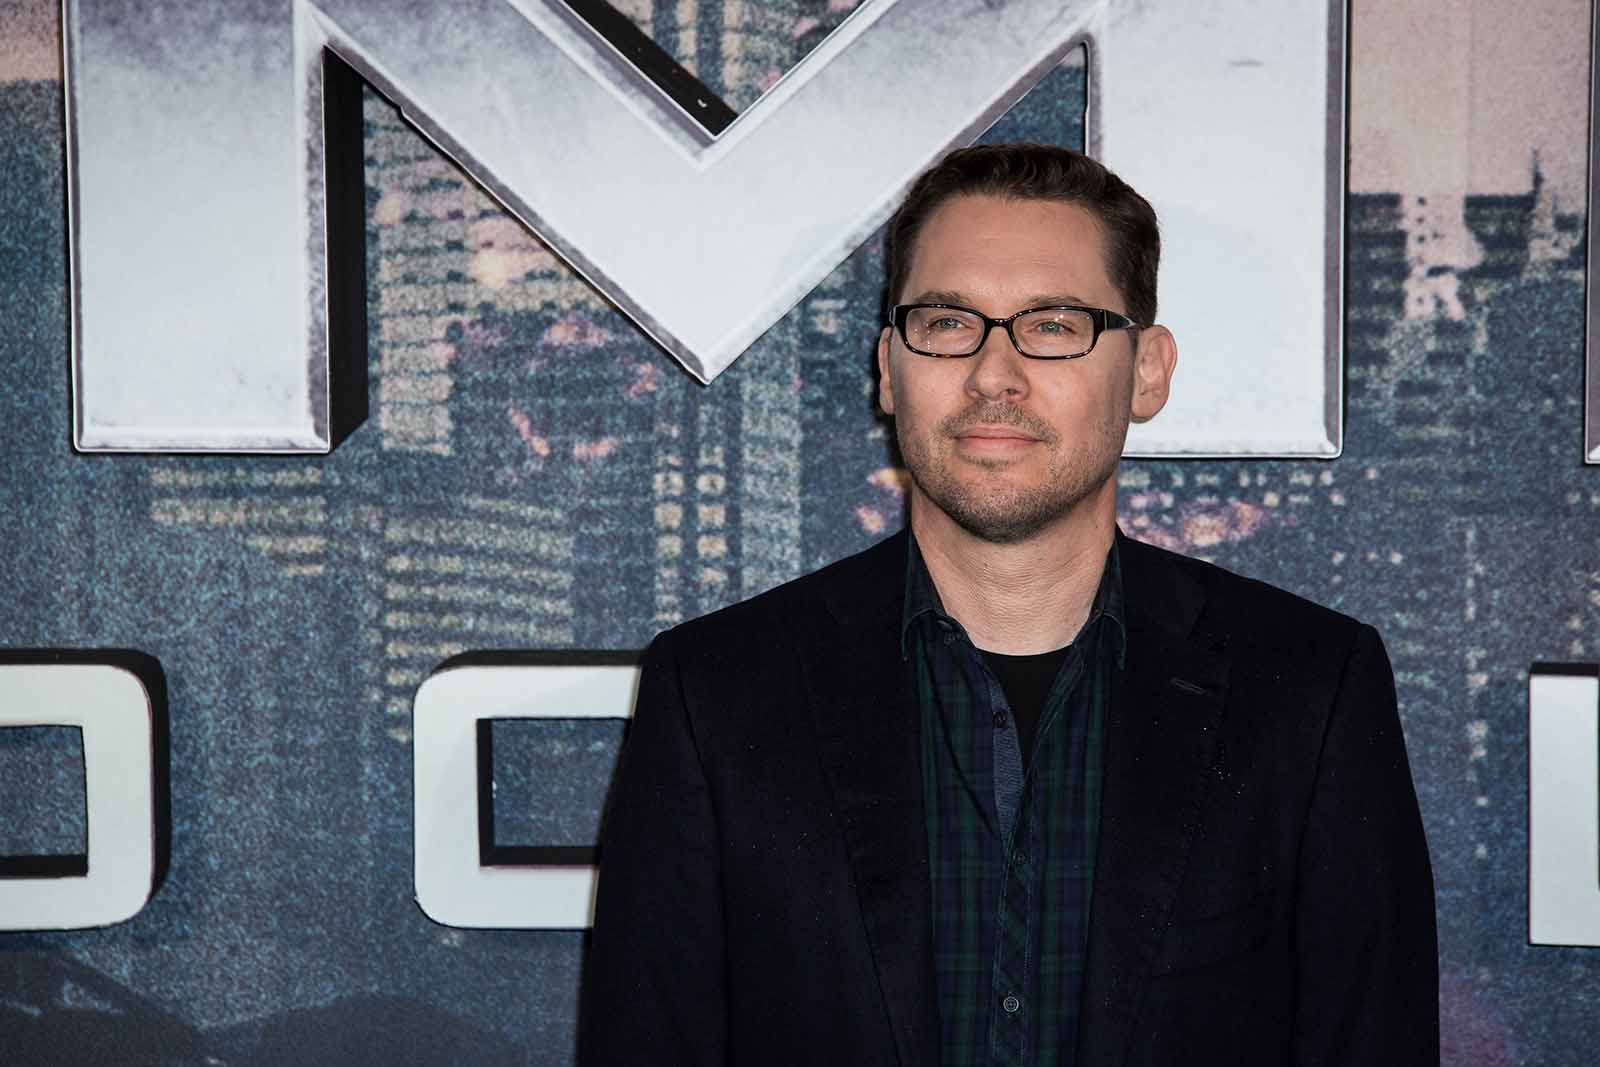 The latest allegations against Bryan Singer may seem shocking, but they're nothing new. Since his big break, Singer has had a history of abuse in Hollywood.